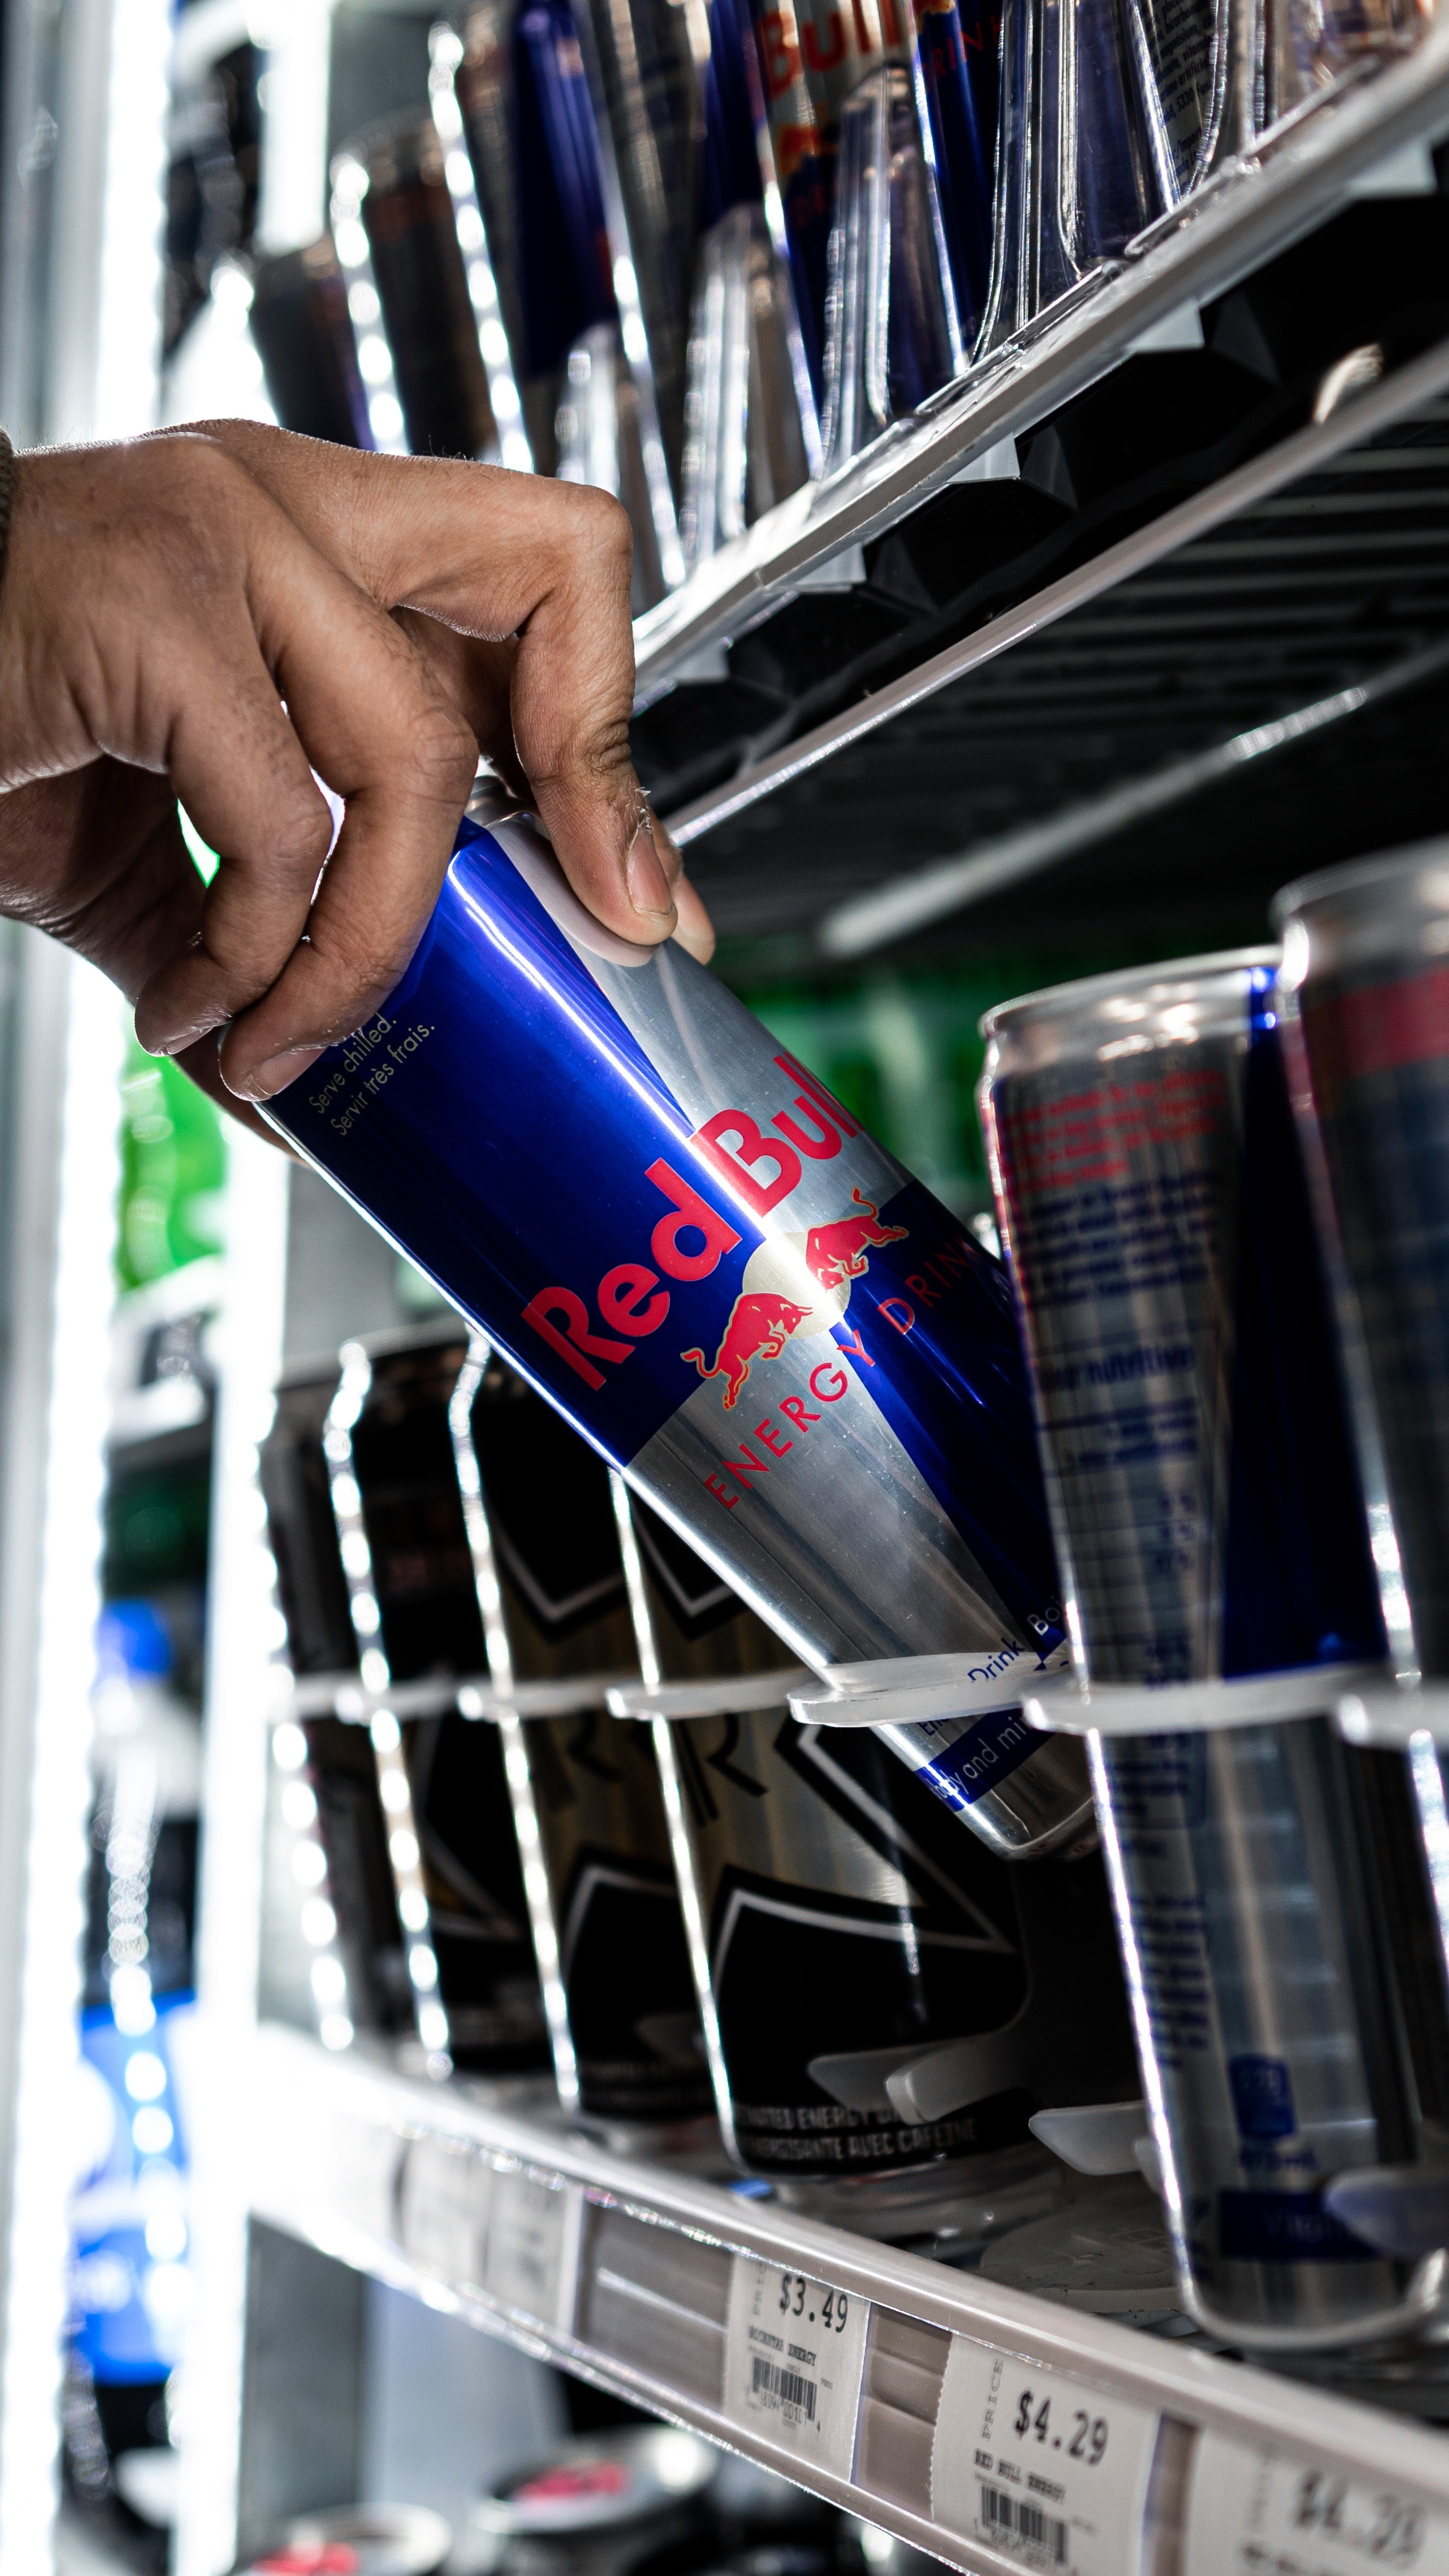 Strategy Study: How Red Bull Became A Global Brand Through Marketing